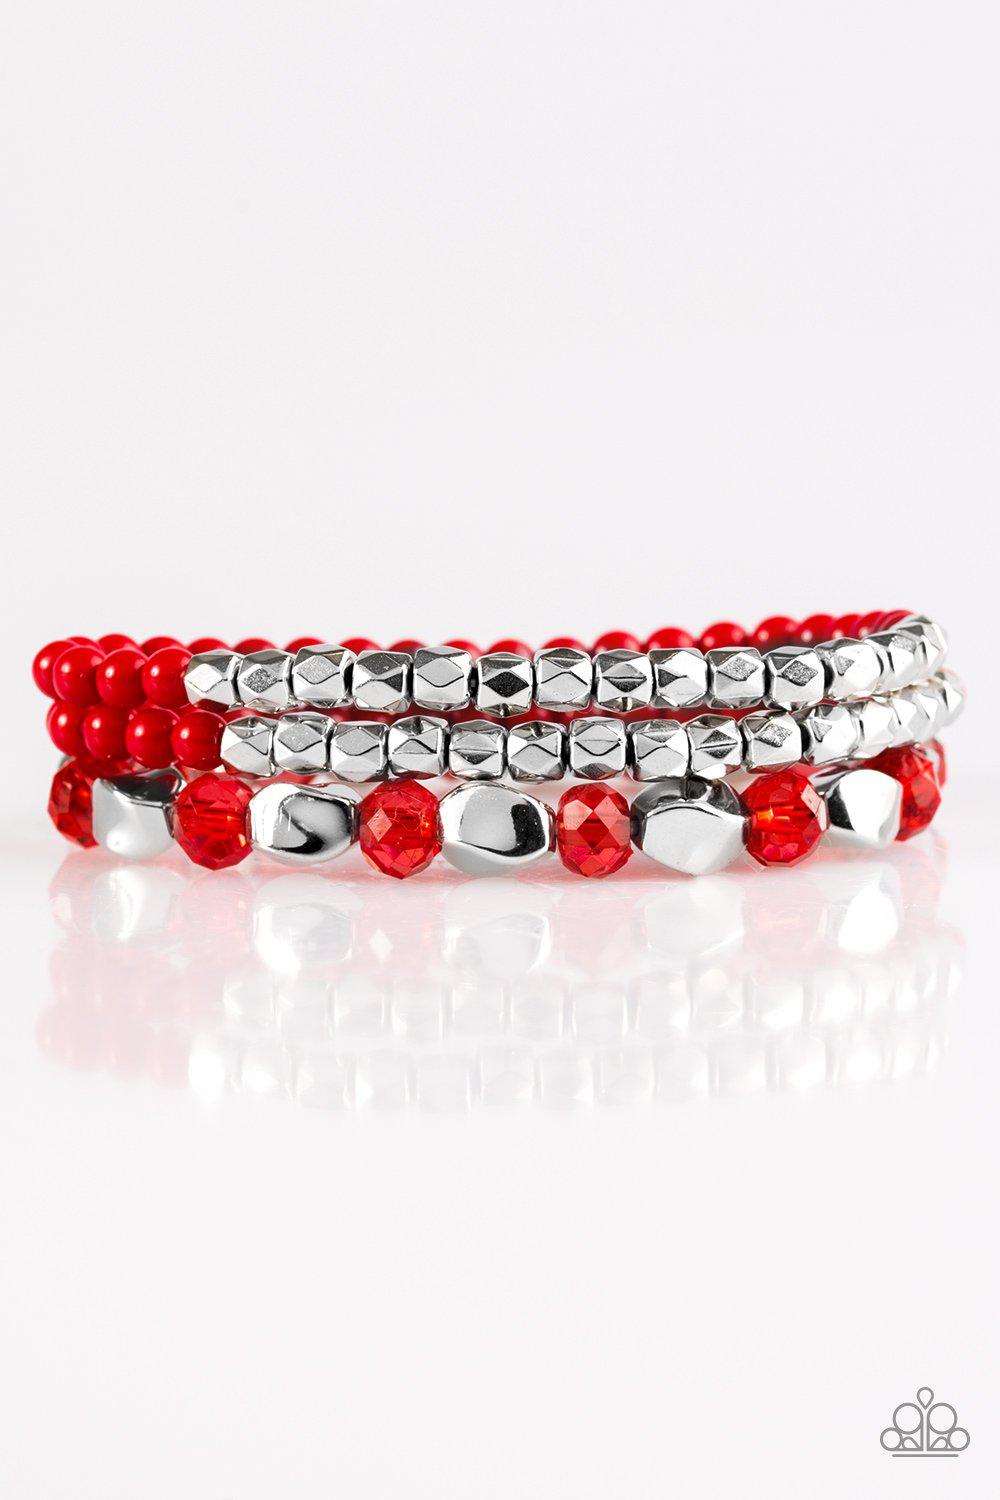 Beaded Bravado Red and Silver Bracelet Set - Paparazzi Accessories-CarasShop.com - $5 Jewelry by Cara Jewels